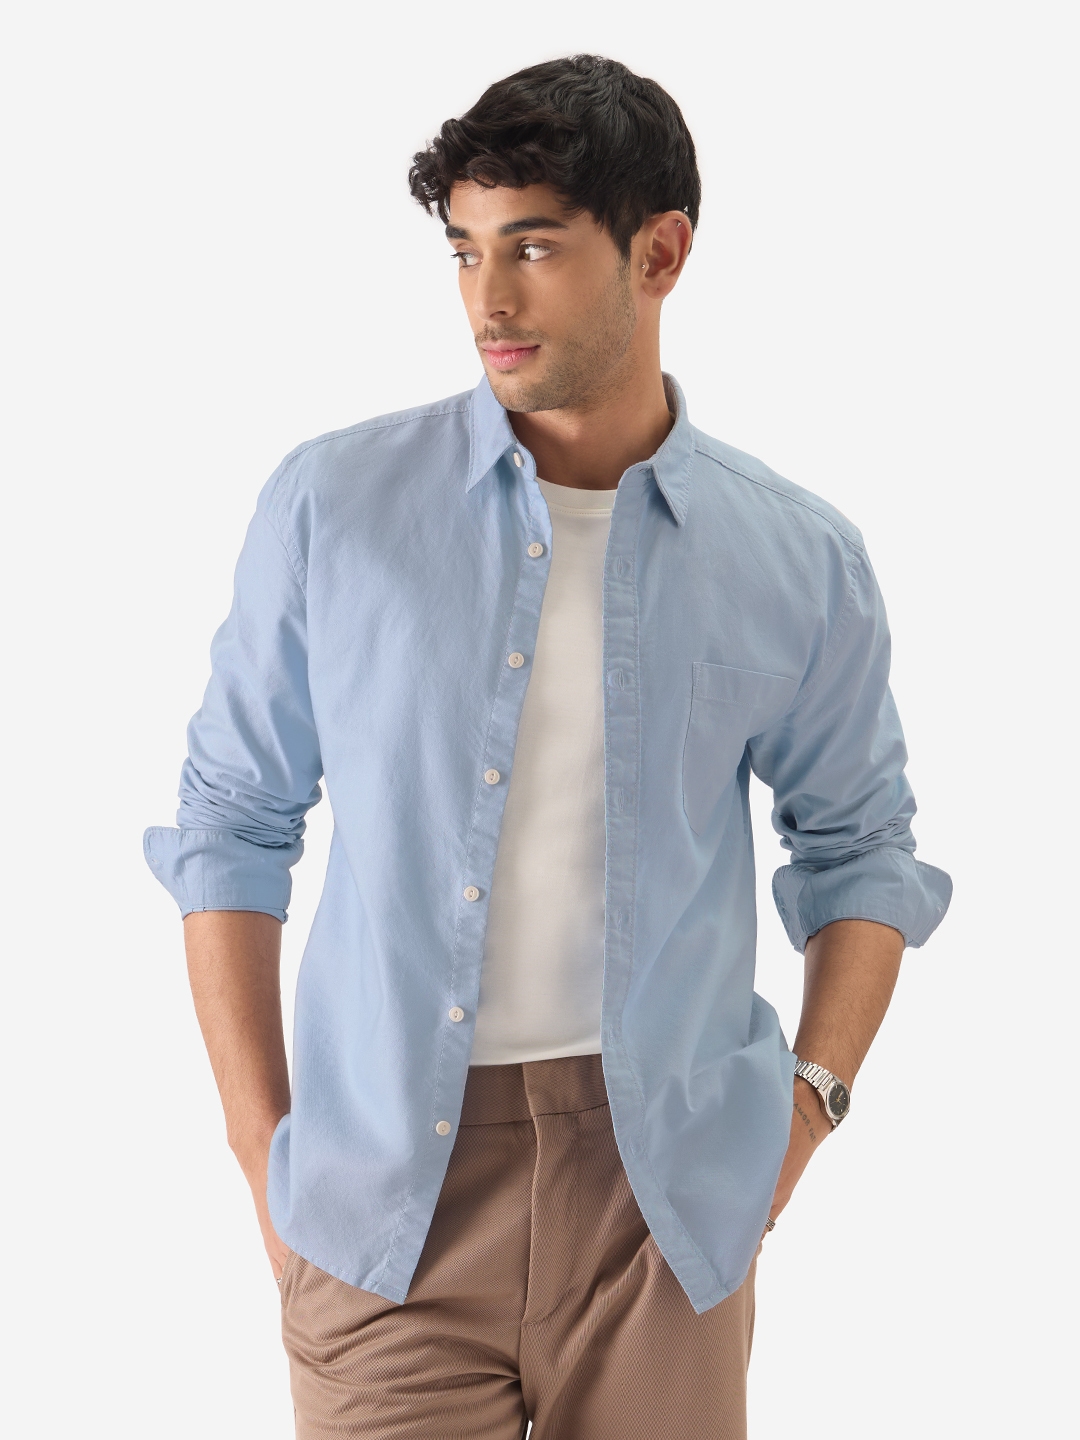 The Souled Store | Men's Solids: Celestial Blue Shirts